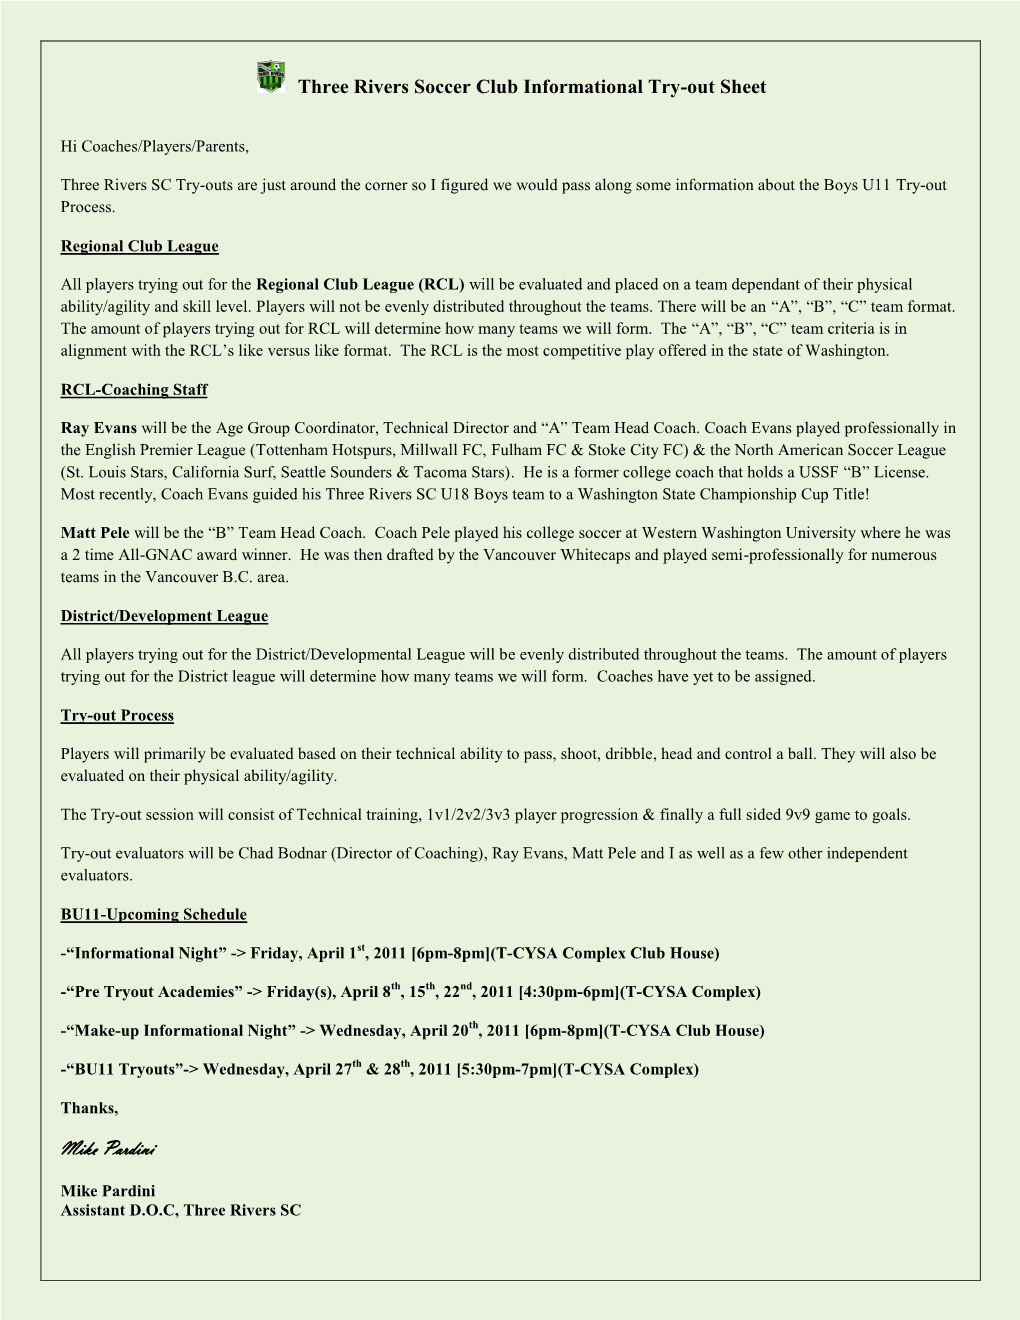 Three Rivers Soccer Club Informational Try-Out Sheet Mike